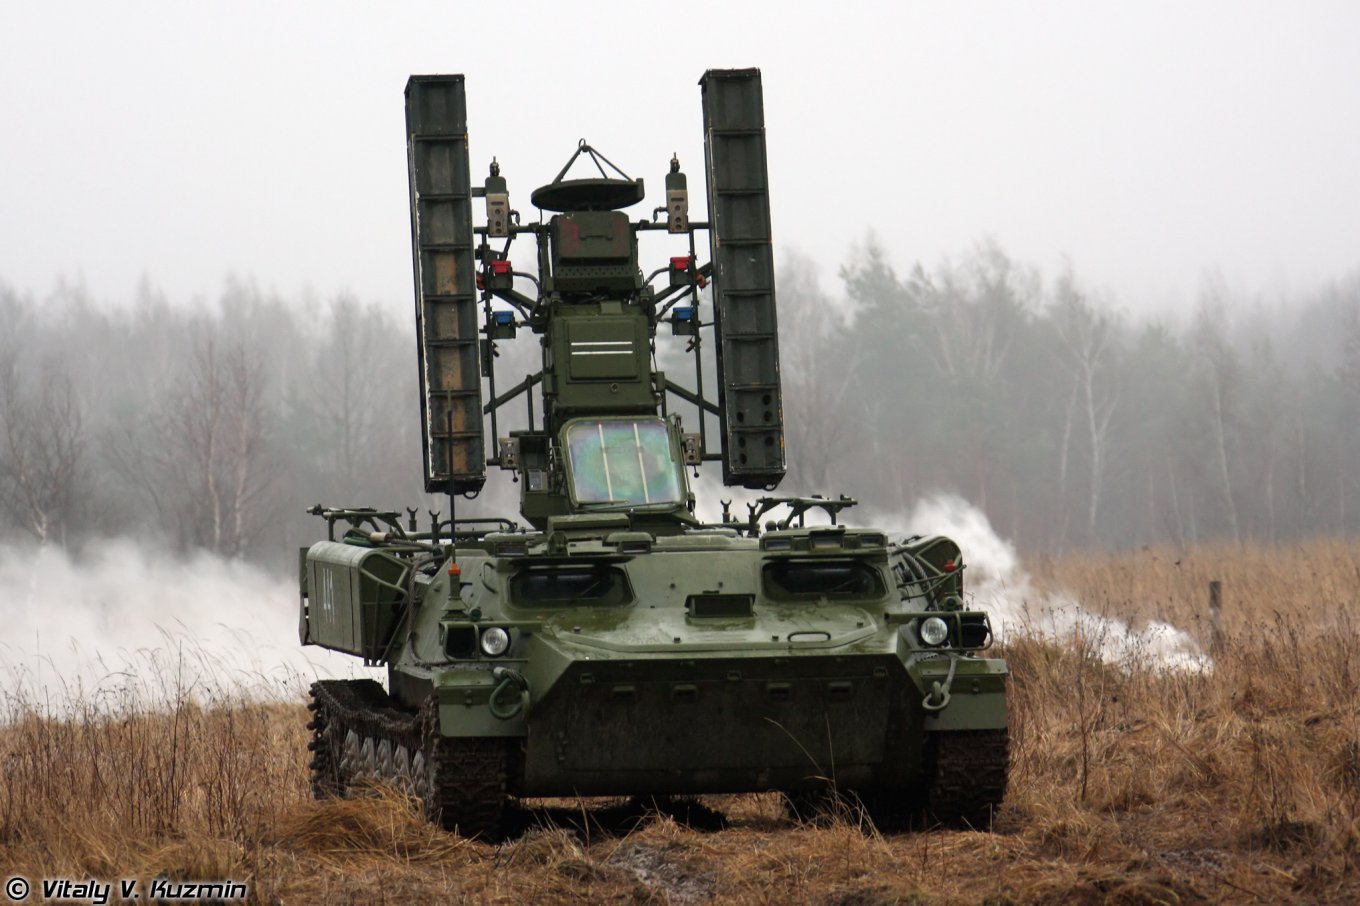 Strela-10 SAM / Defense Express / Strela-10M4 Was Supposed to Become the Anti-Drone Weapon russia Was Seeking, Now Needs Extra Protection Against FPV Drones